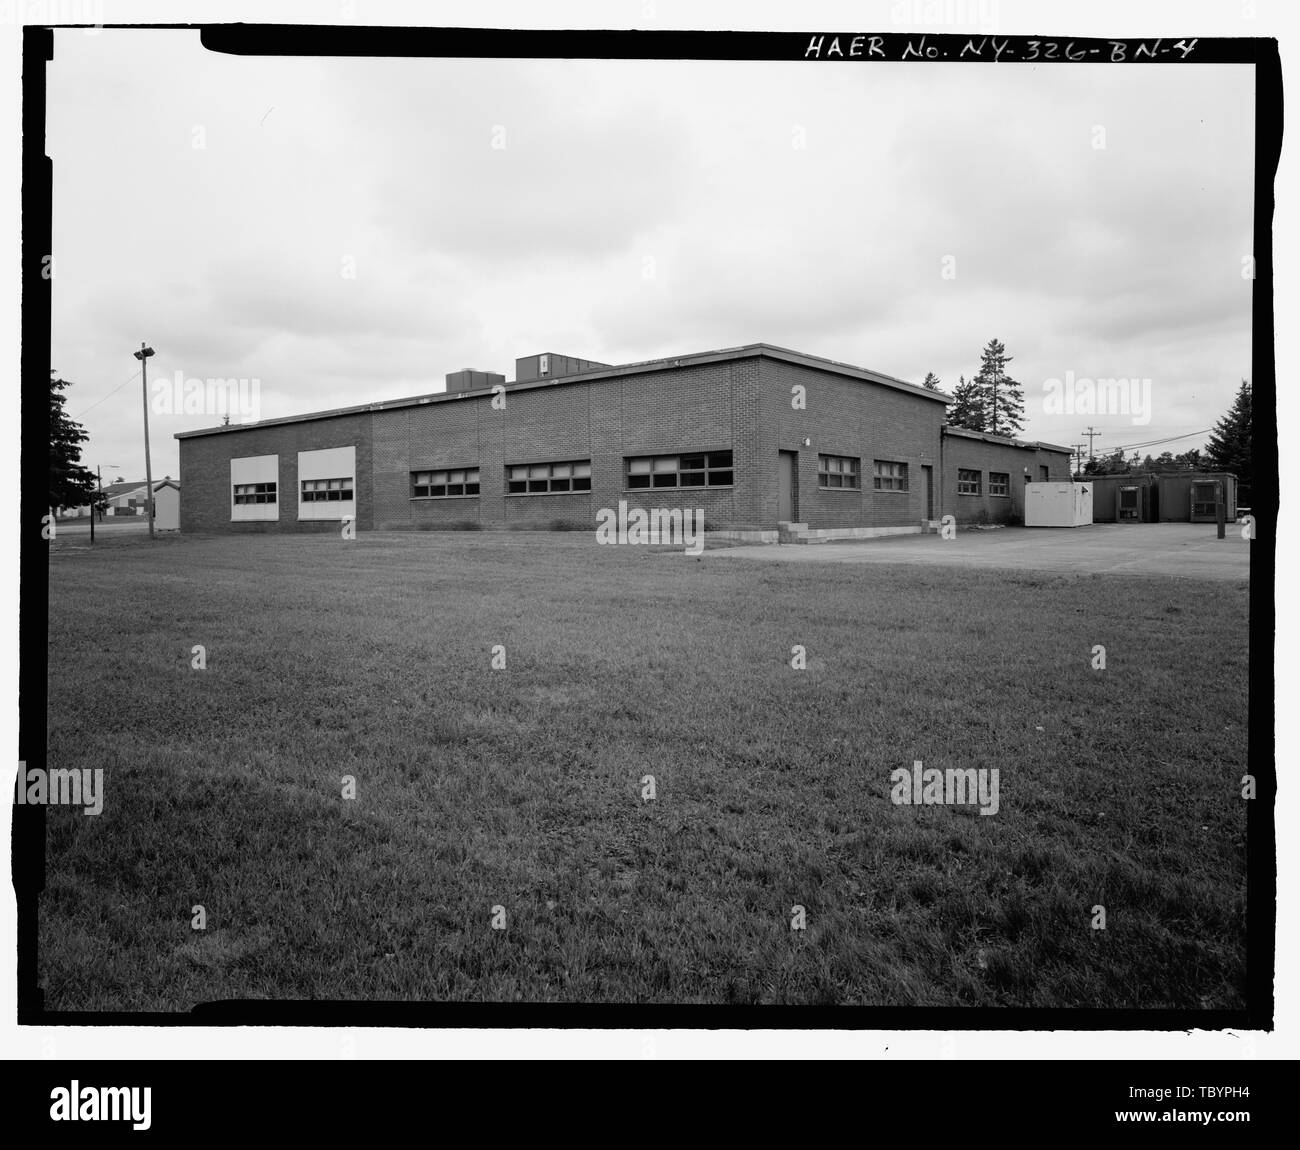 NORTH (SIDE) AND EAST (REAR) ELEVATIONS OF BUILDING. VIEW TO WEST.  Plattsburgh Air Force Base, Noncommissioned Officer Open Mess, New York Road, Plattsburgh, Clinton County, NY Stock Photo